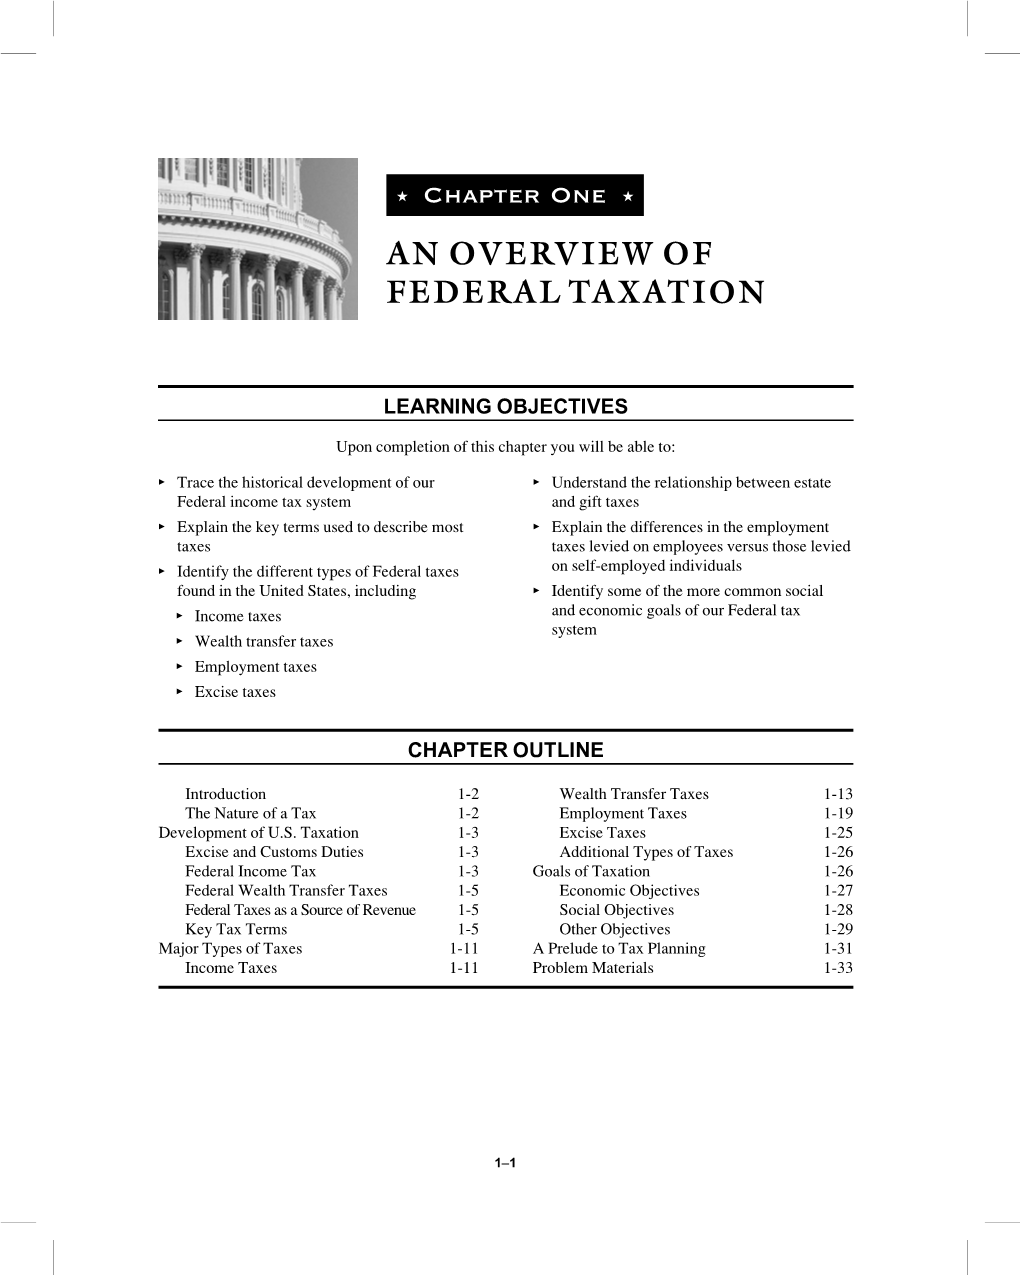 An Overview of Federal Taxation